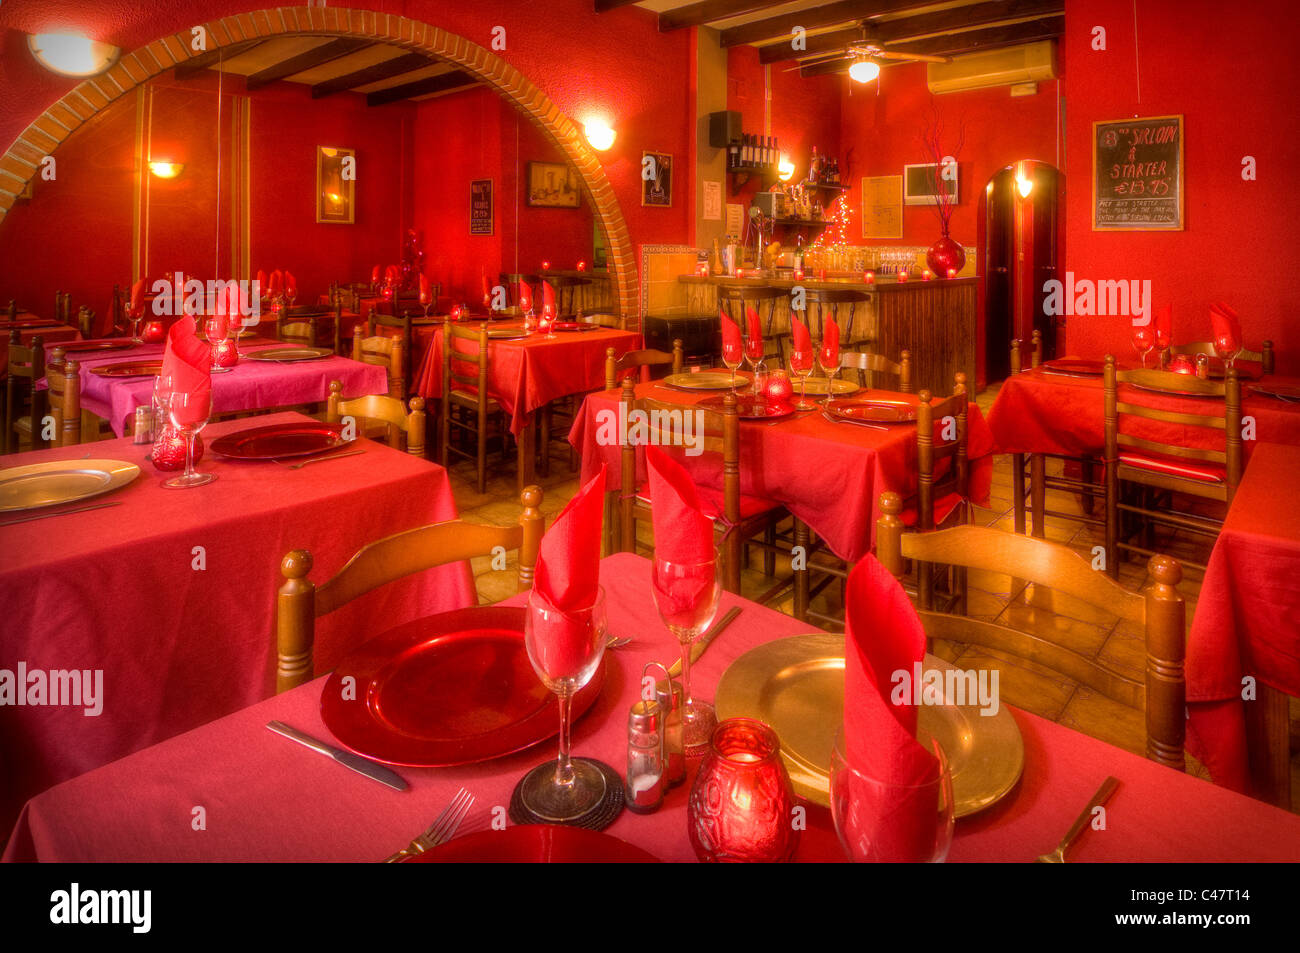 A red interior of a restaurant Stock Photo